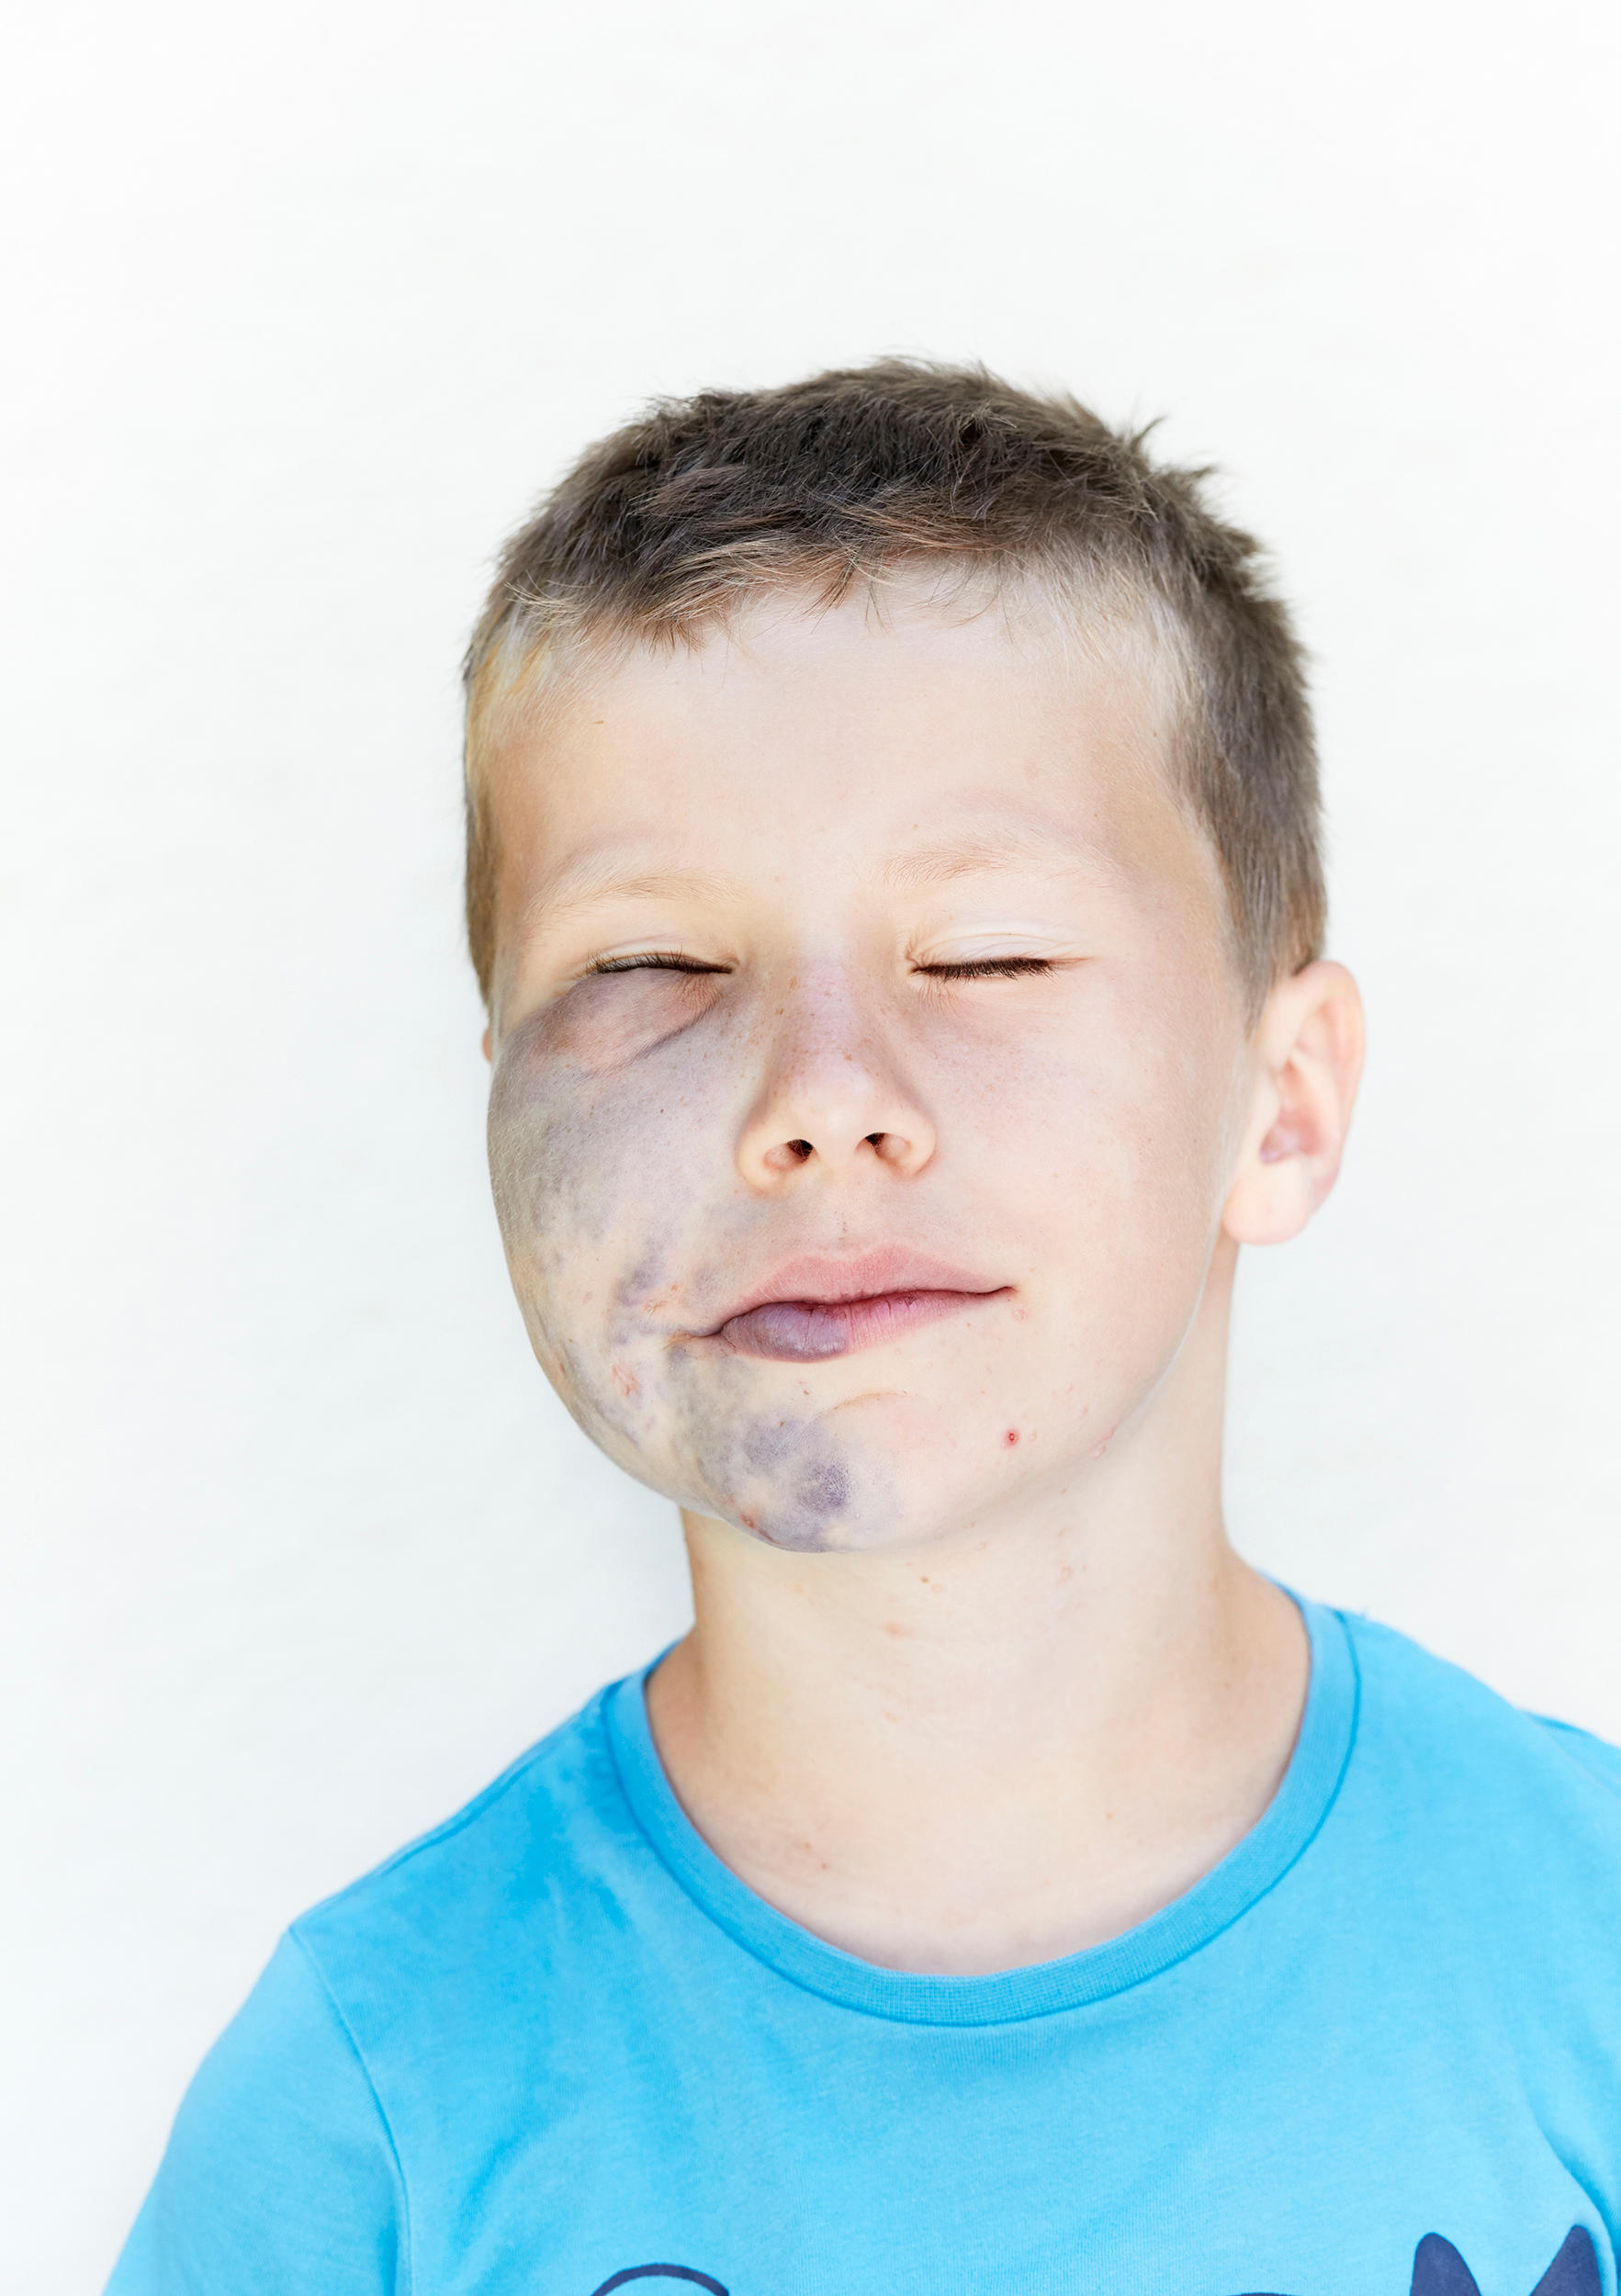 Portrait of a young man with severe skin lesions on his face